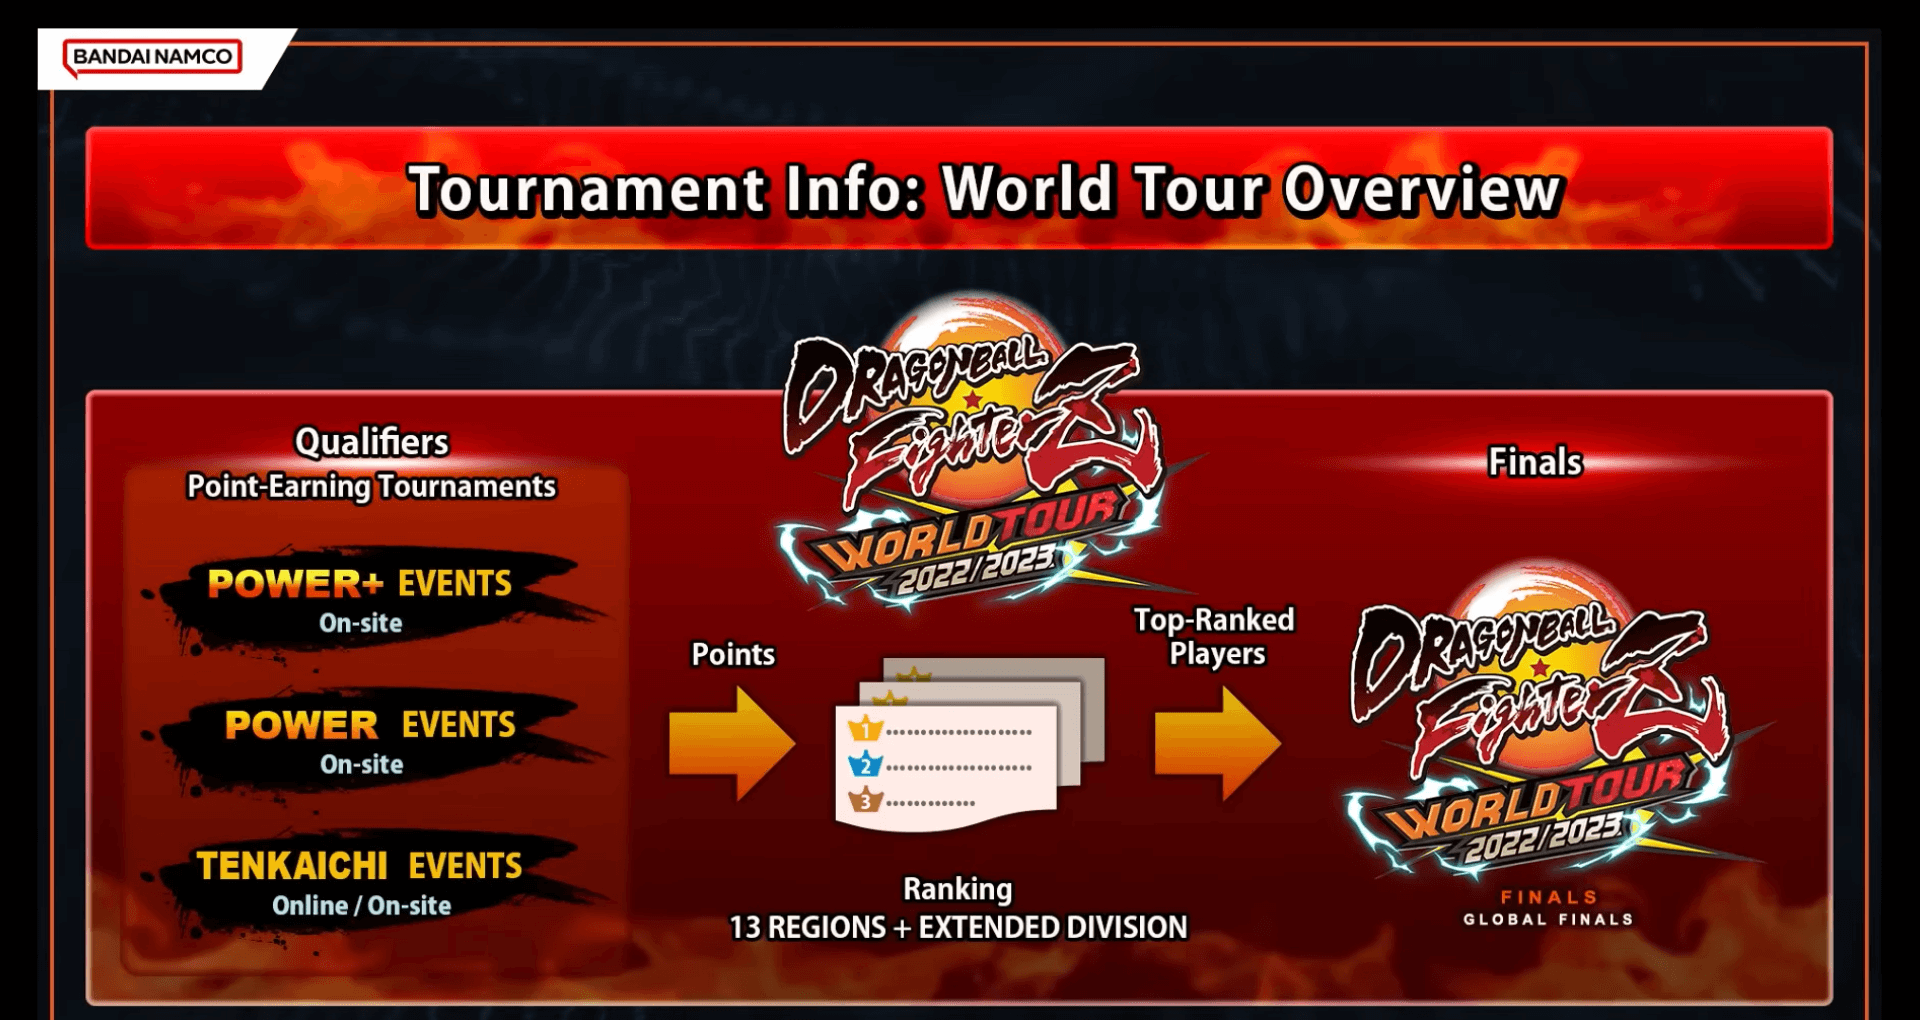 DBFZ World Tour 2022/2023: Top Players in All Regions